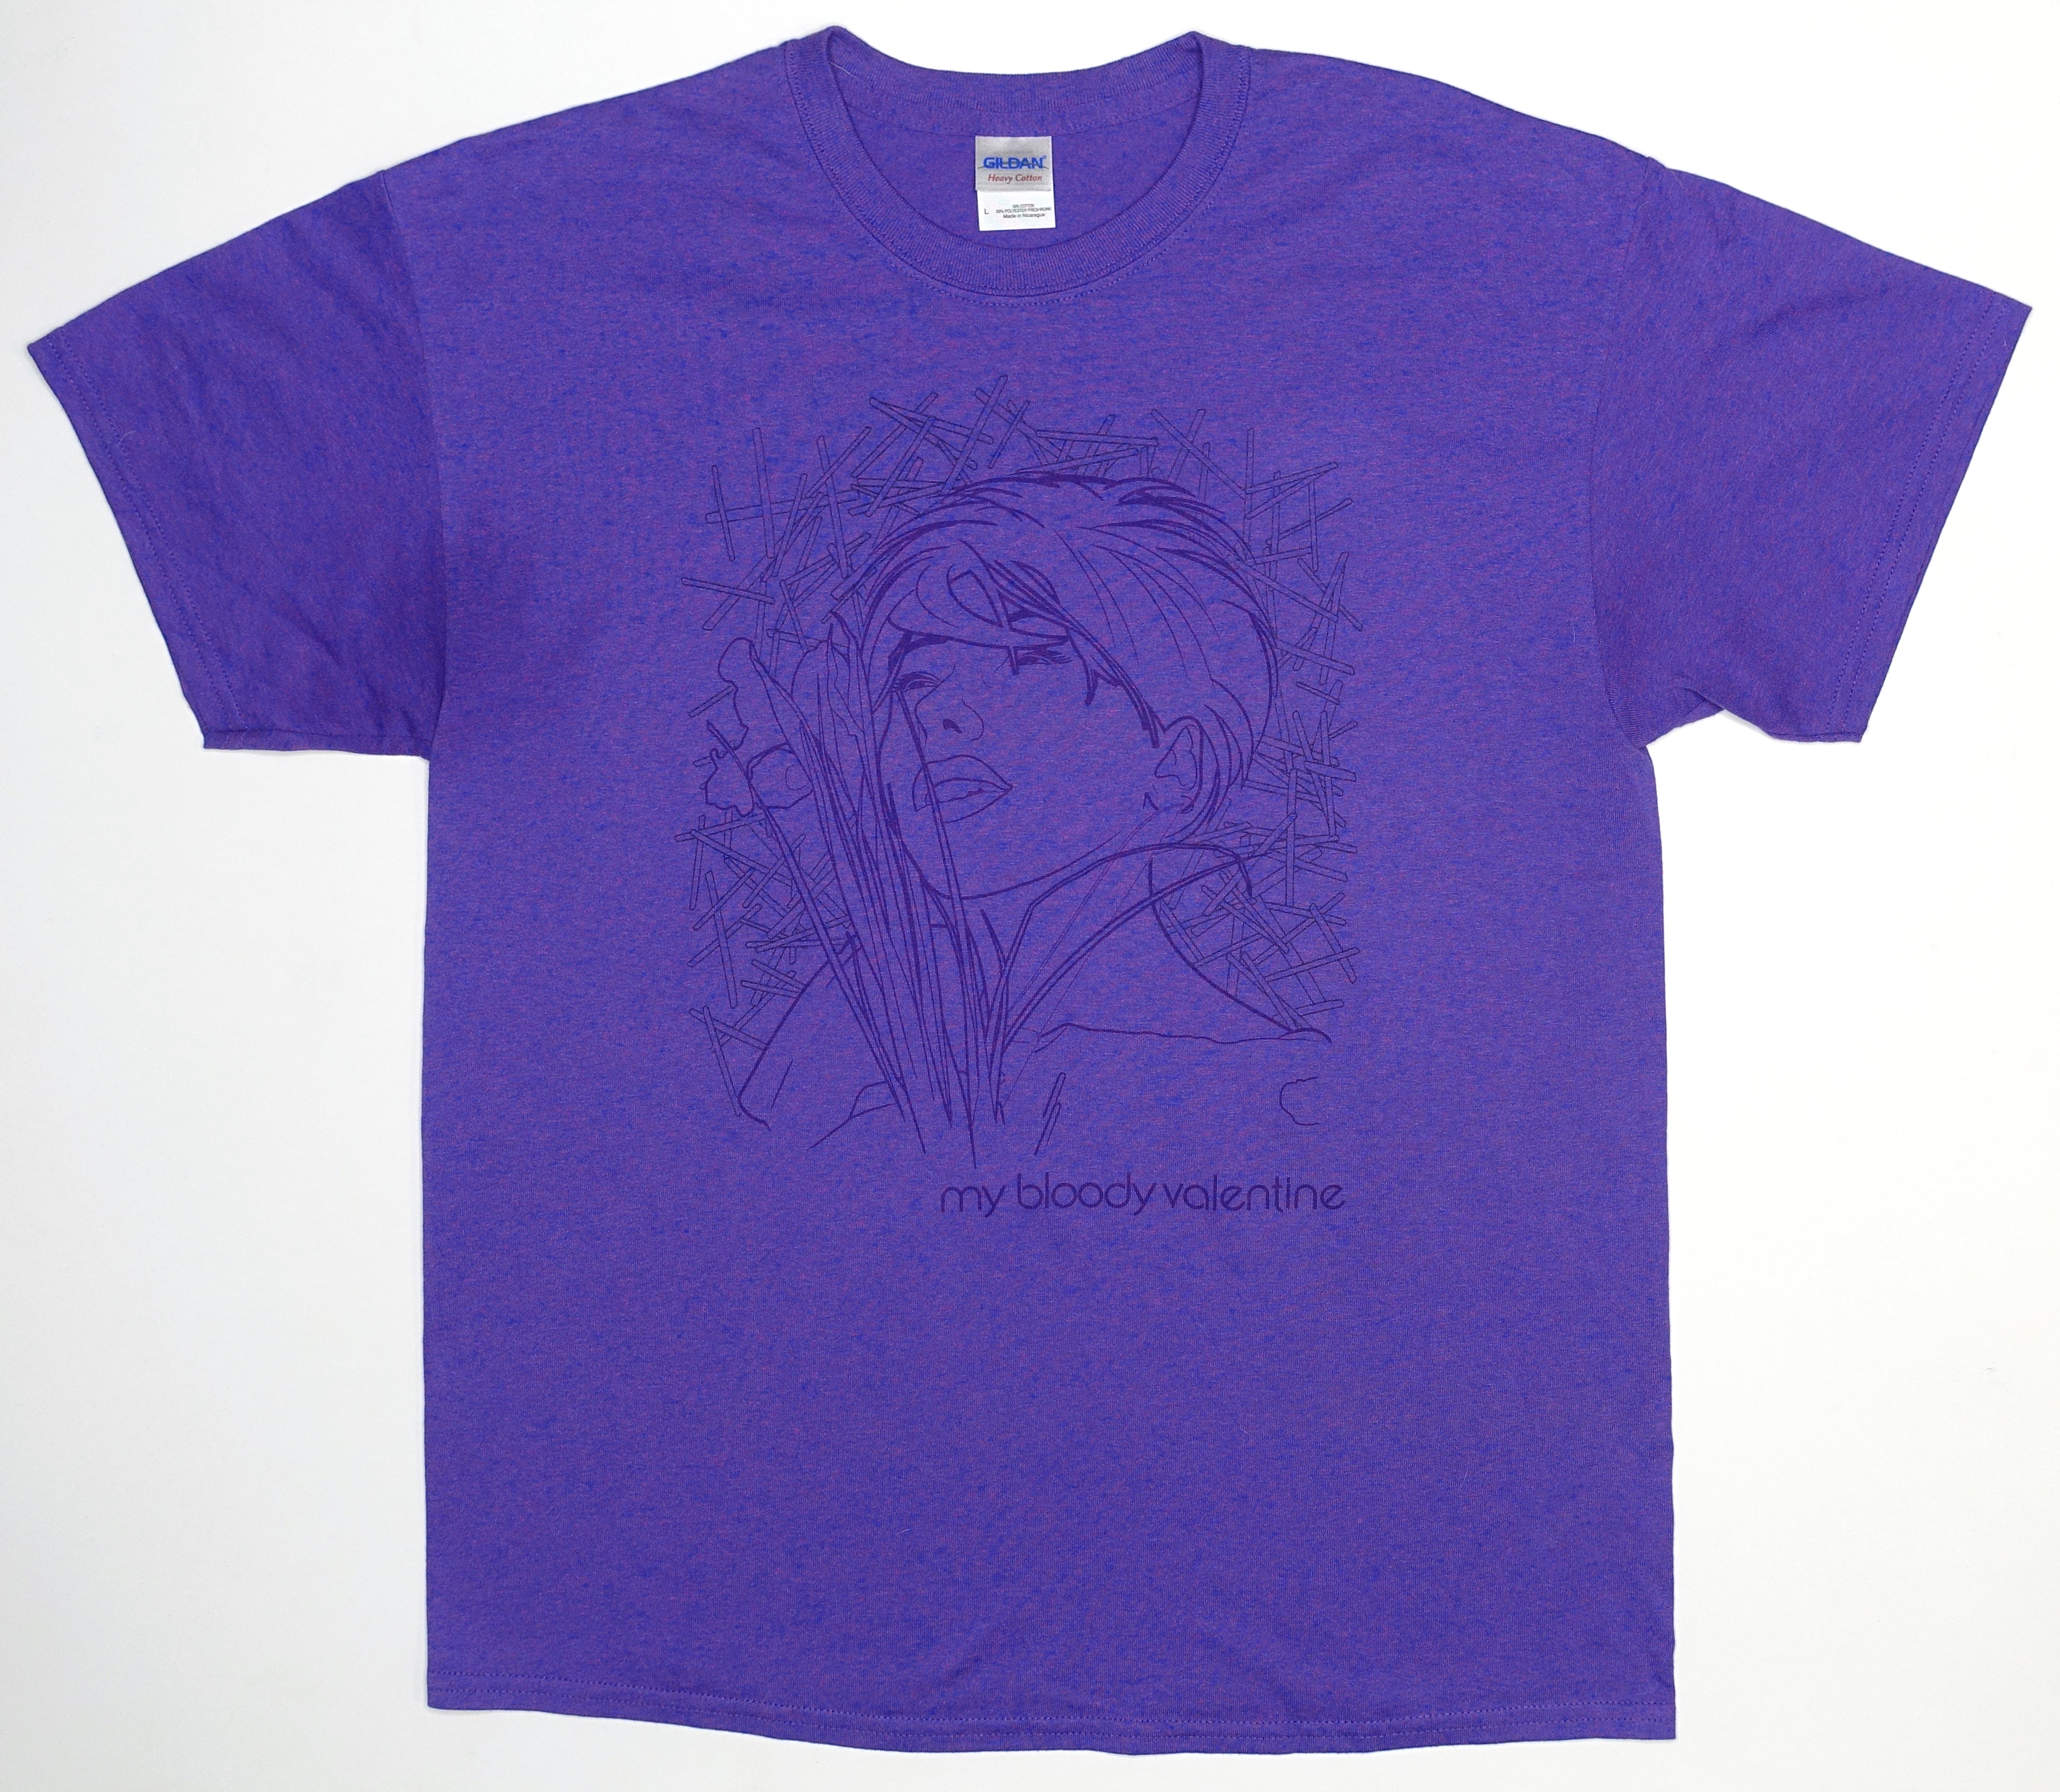 My Bloody Valentine - You Made Me Realise (Drawing) 2009 Tour Shirt Size Large